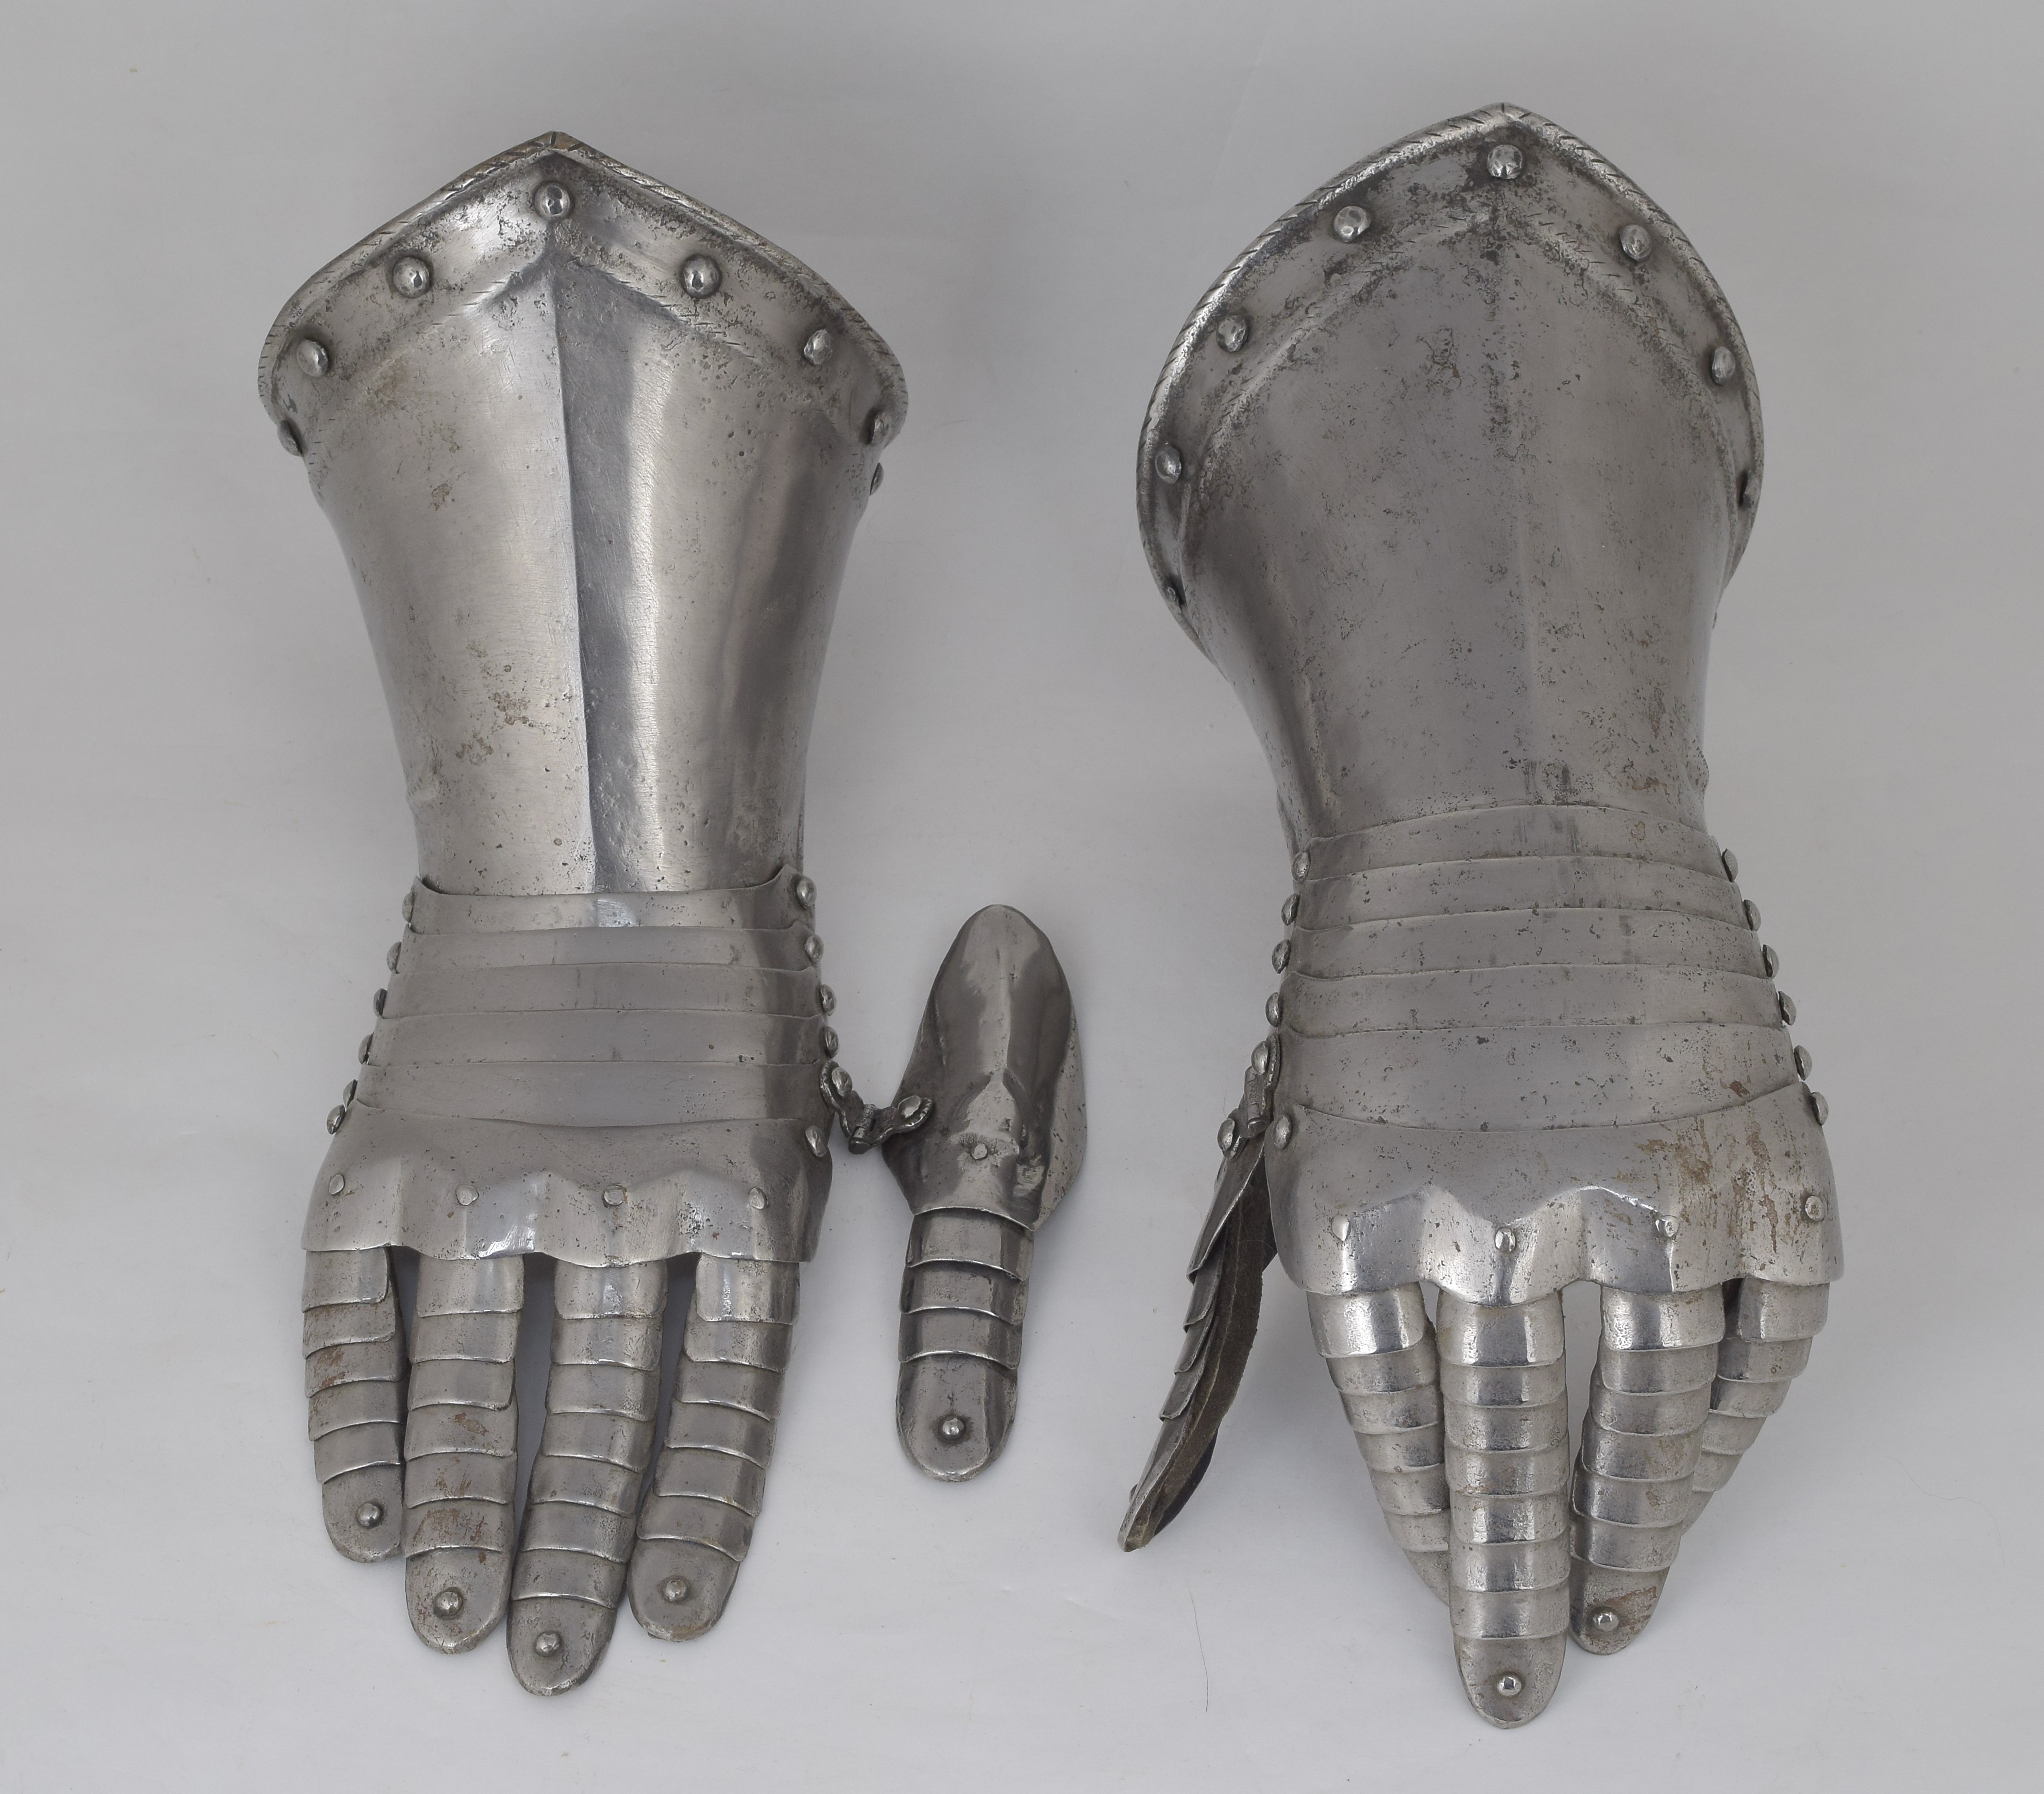 Pair of Gauntlets - A-160-white-one-propped-one-flat